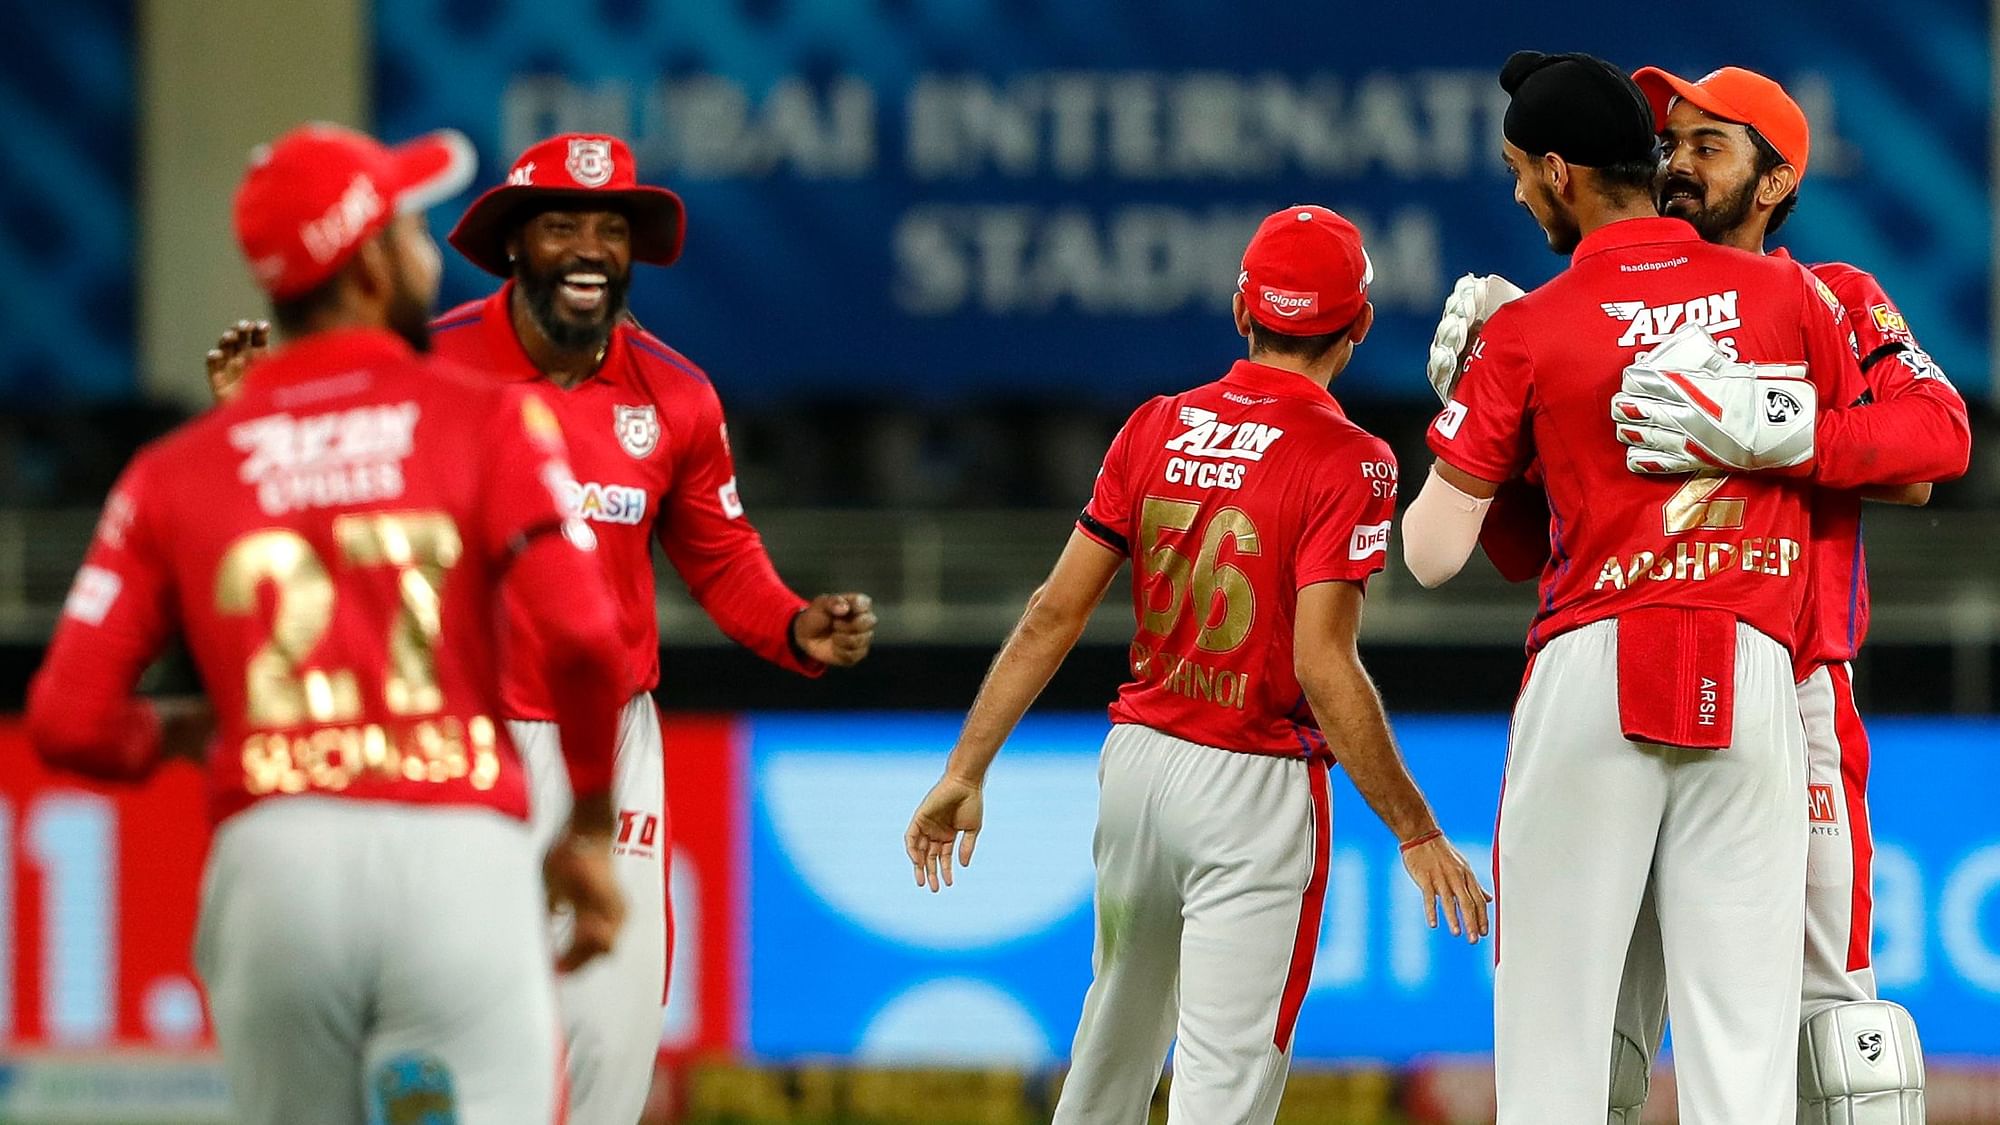 KXIP won the game by 12 runs with one ball remaining.